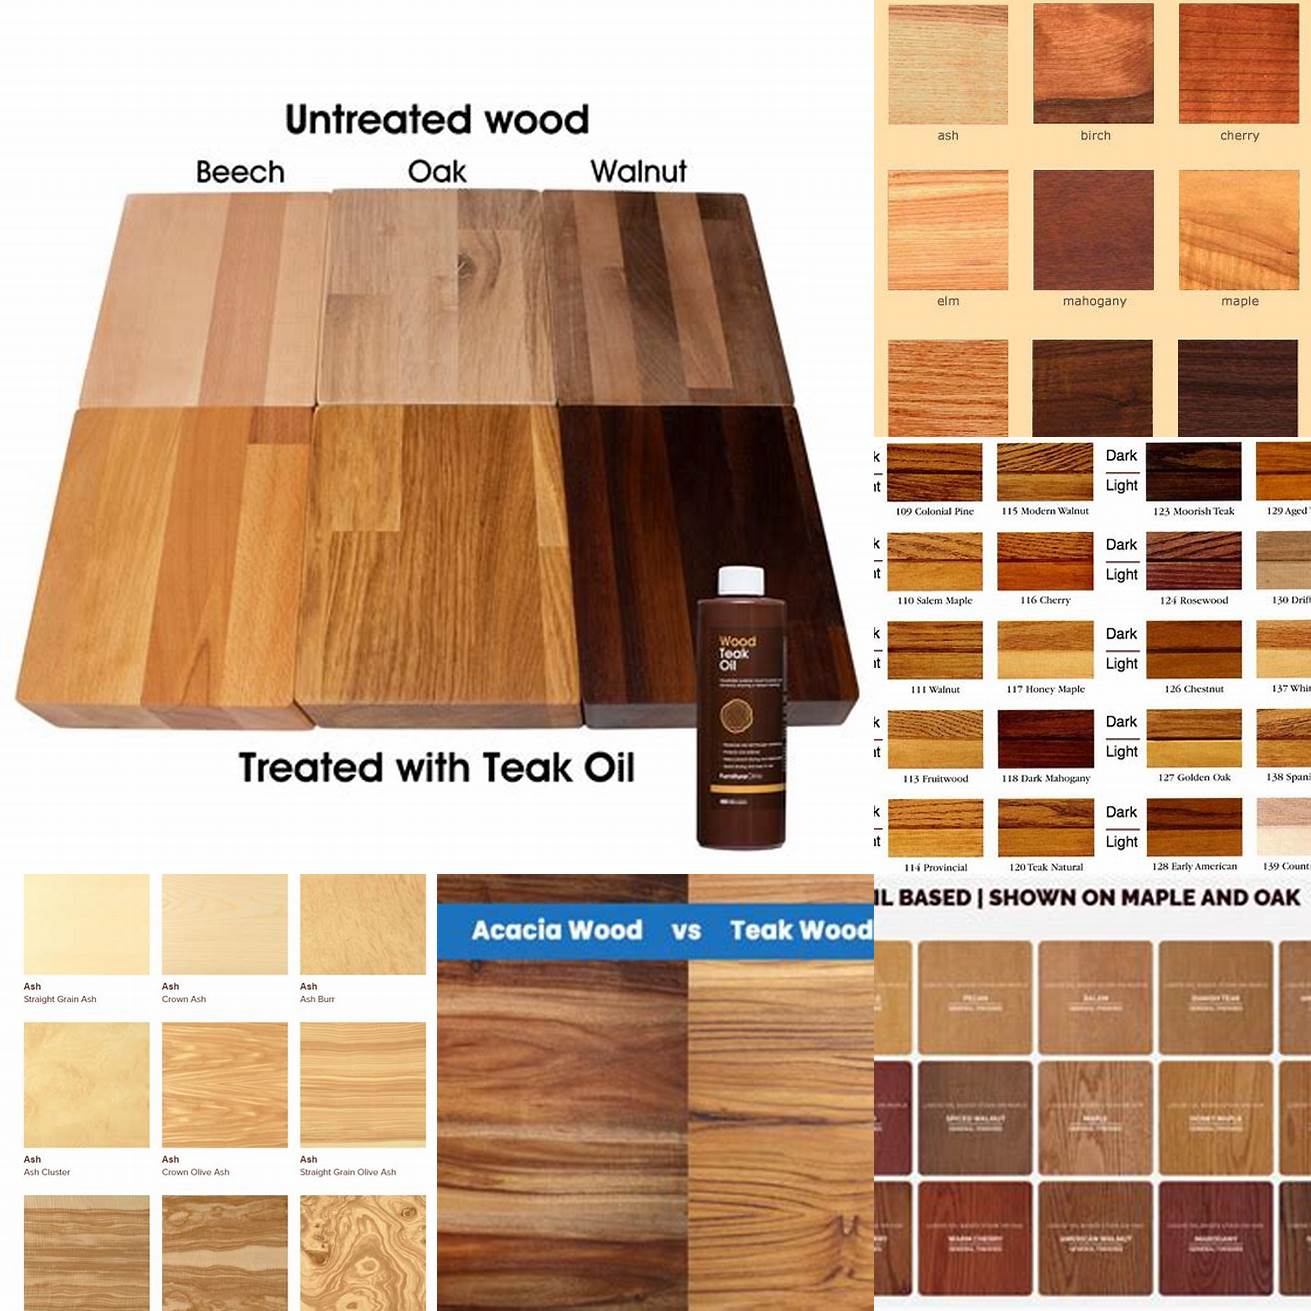 Comparison images of different teak finishes